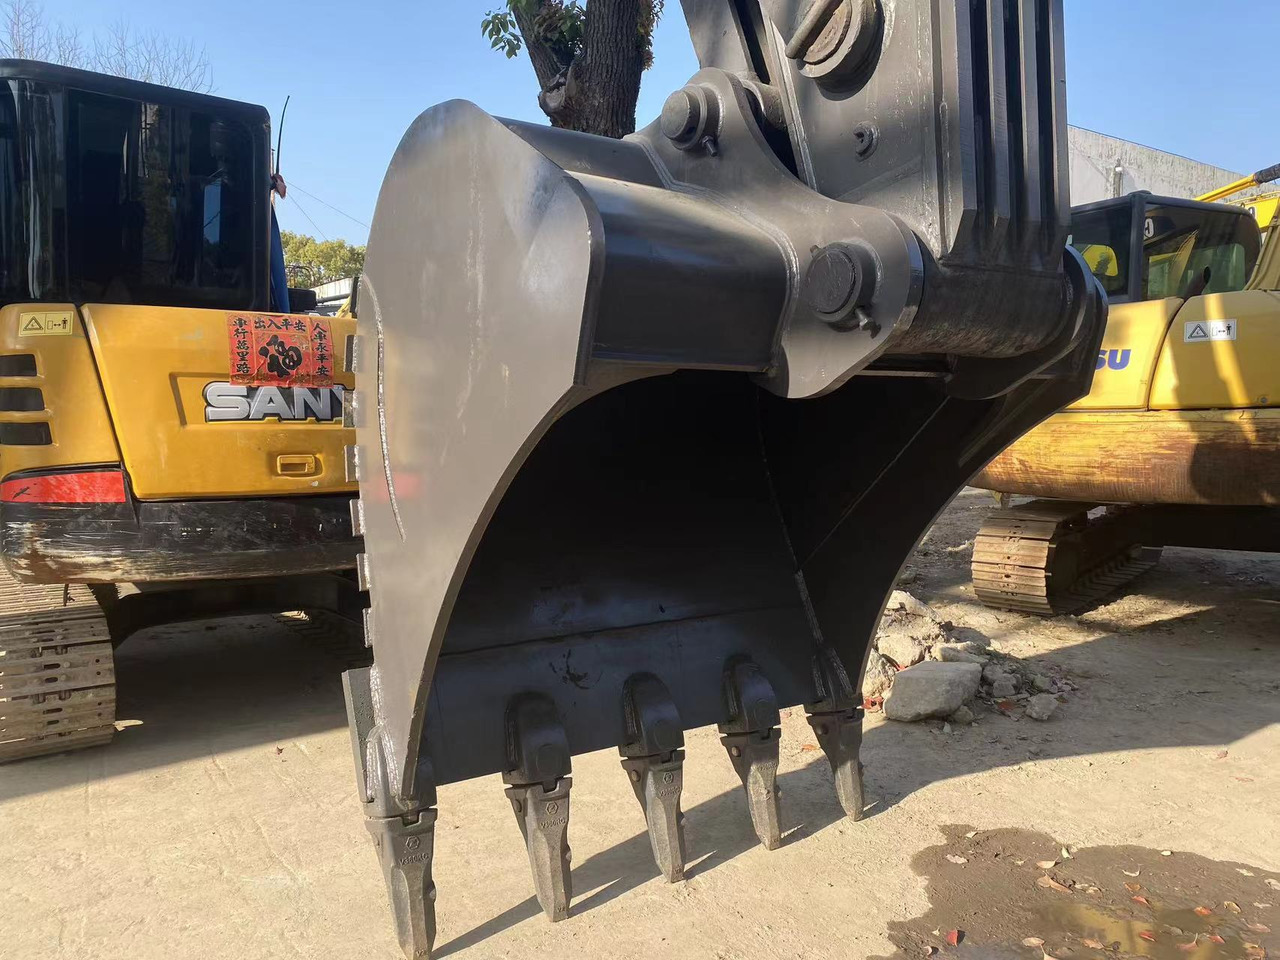 Hot selling original made Used excavator VOLVO EC480DL in stock low price for sale lizingą Hot selling original made Used excavator VOLVO EC480DL in stock low price for sale: foto 7